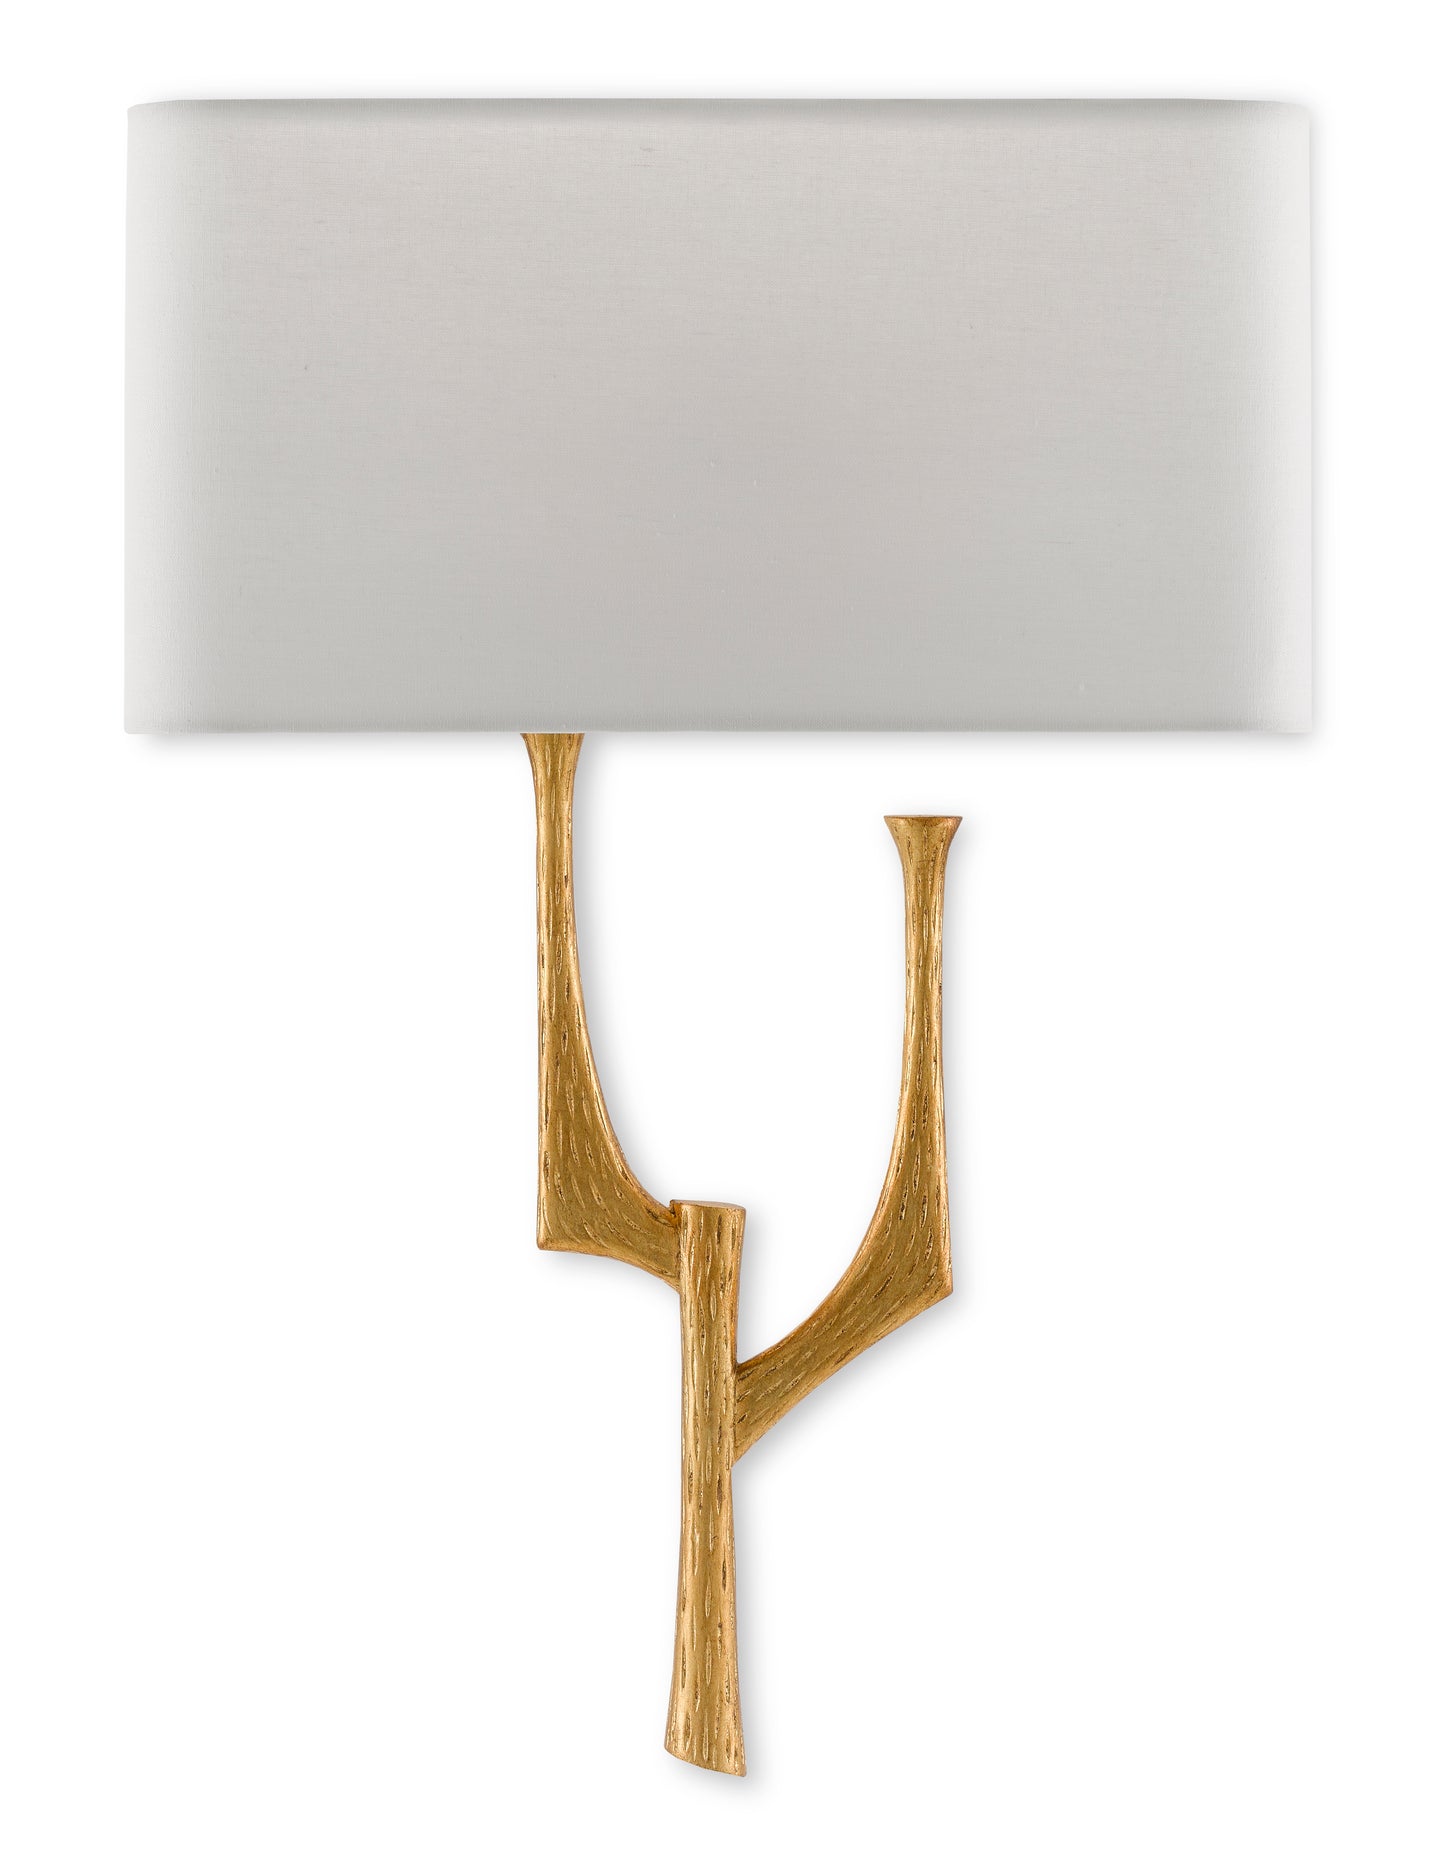 Bodnant Wall Sconce by Currey & Company | Luxury Wall Sconce | Willow & Albert Home